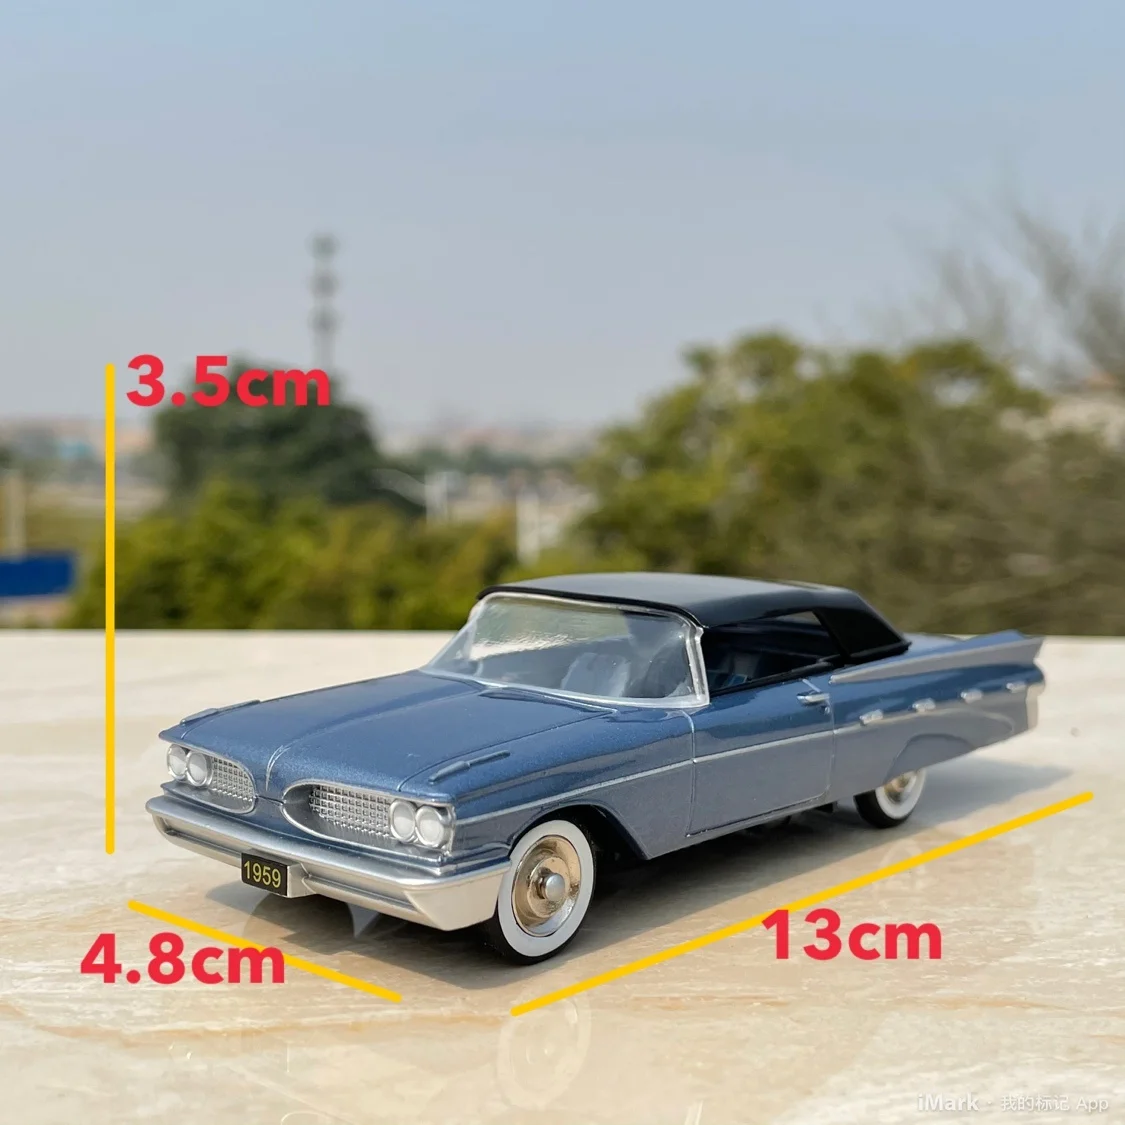 

1/43 New To Bargain Die-cast Metal American Muscle Feelings Vintage Car Model Furniture Display Collection Toys For Children